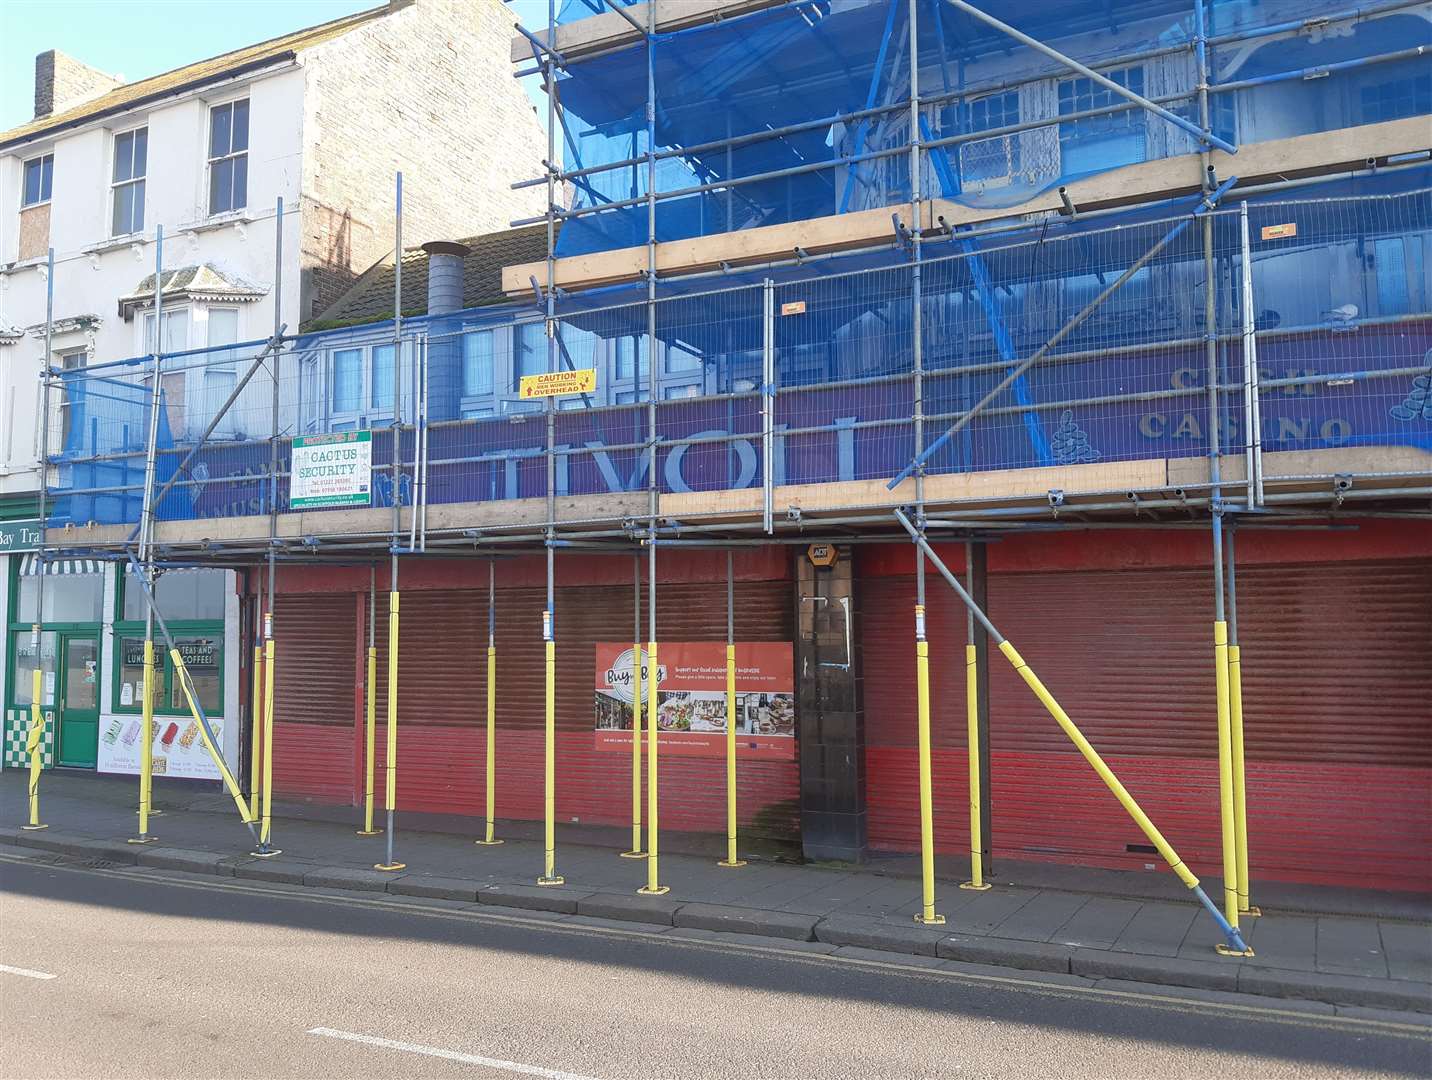 The former Tivoli amusements in Herne Bay have been an eyesore for years